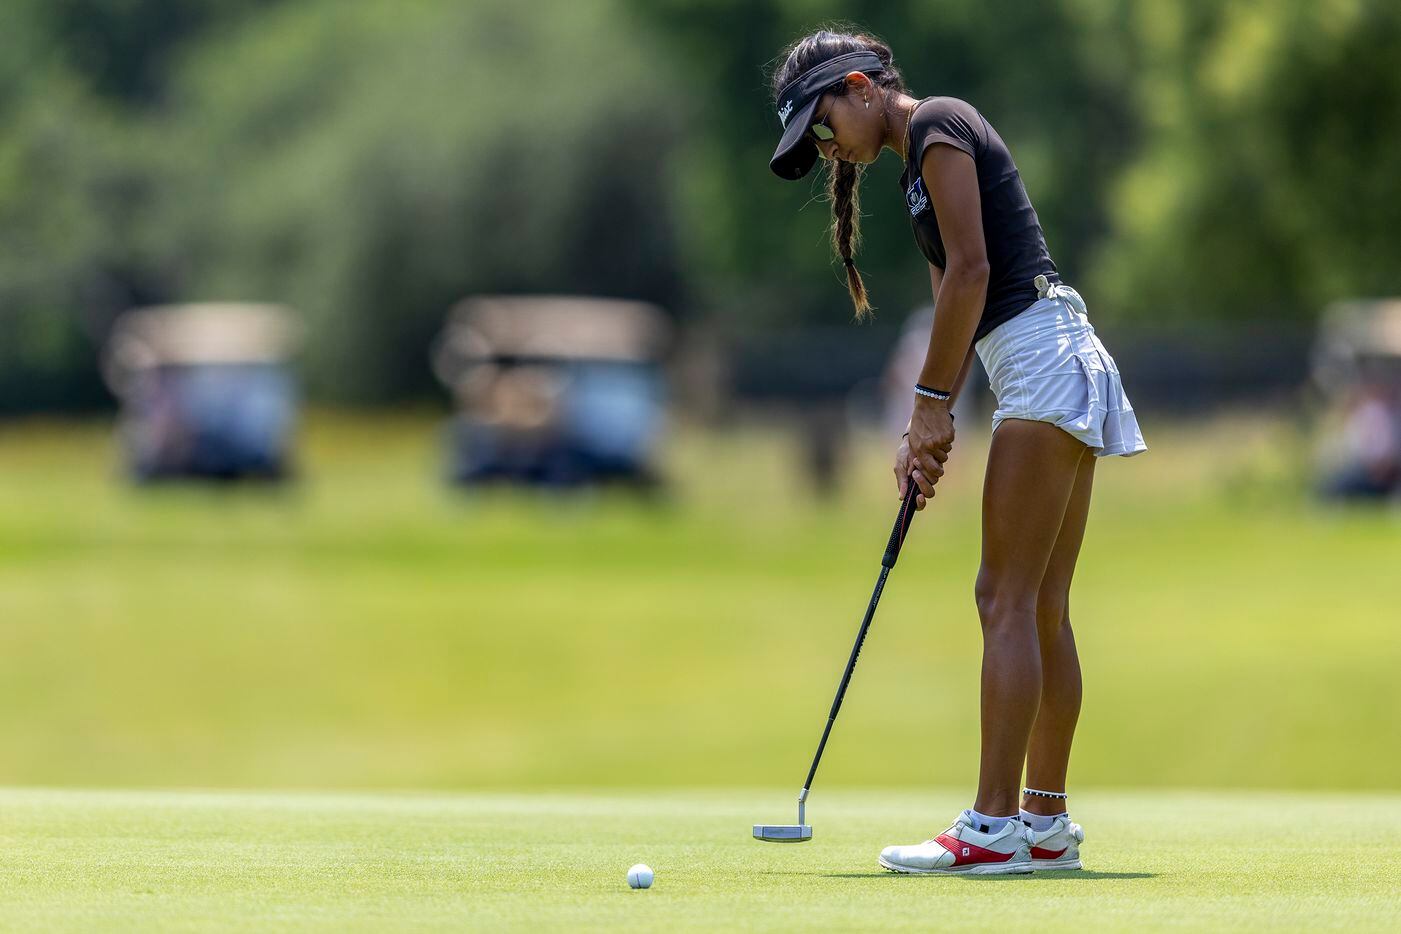 Hebron’s Symran Shah putts on the 8th green during the 6A girls state golf tournament in...